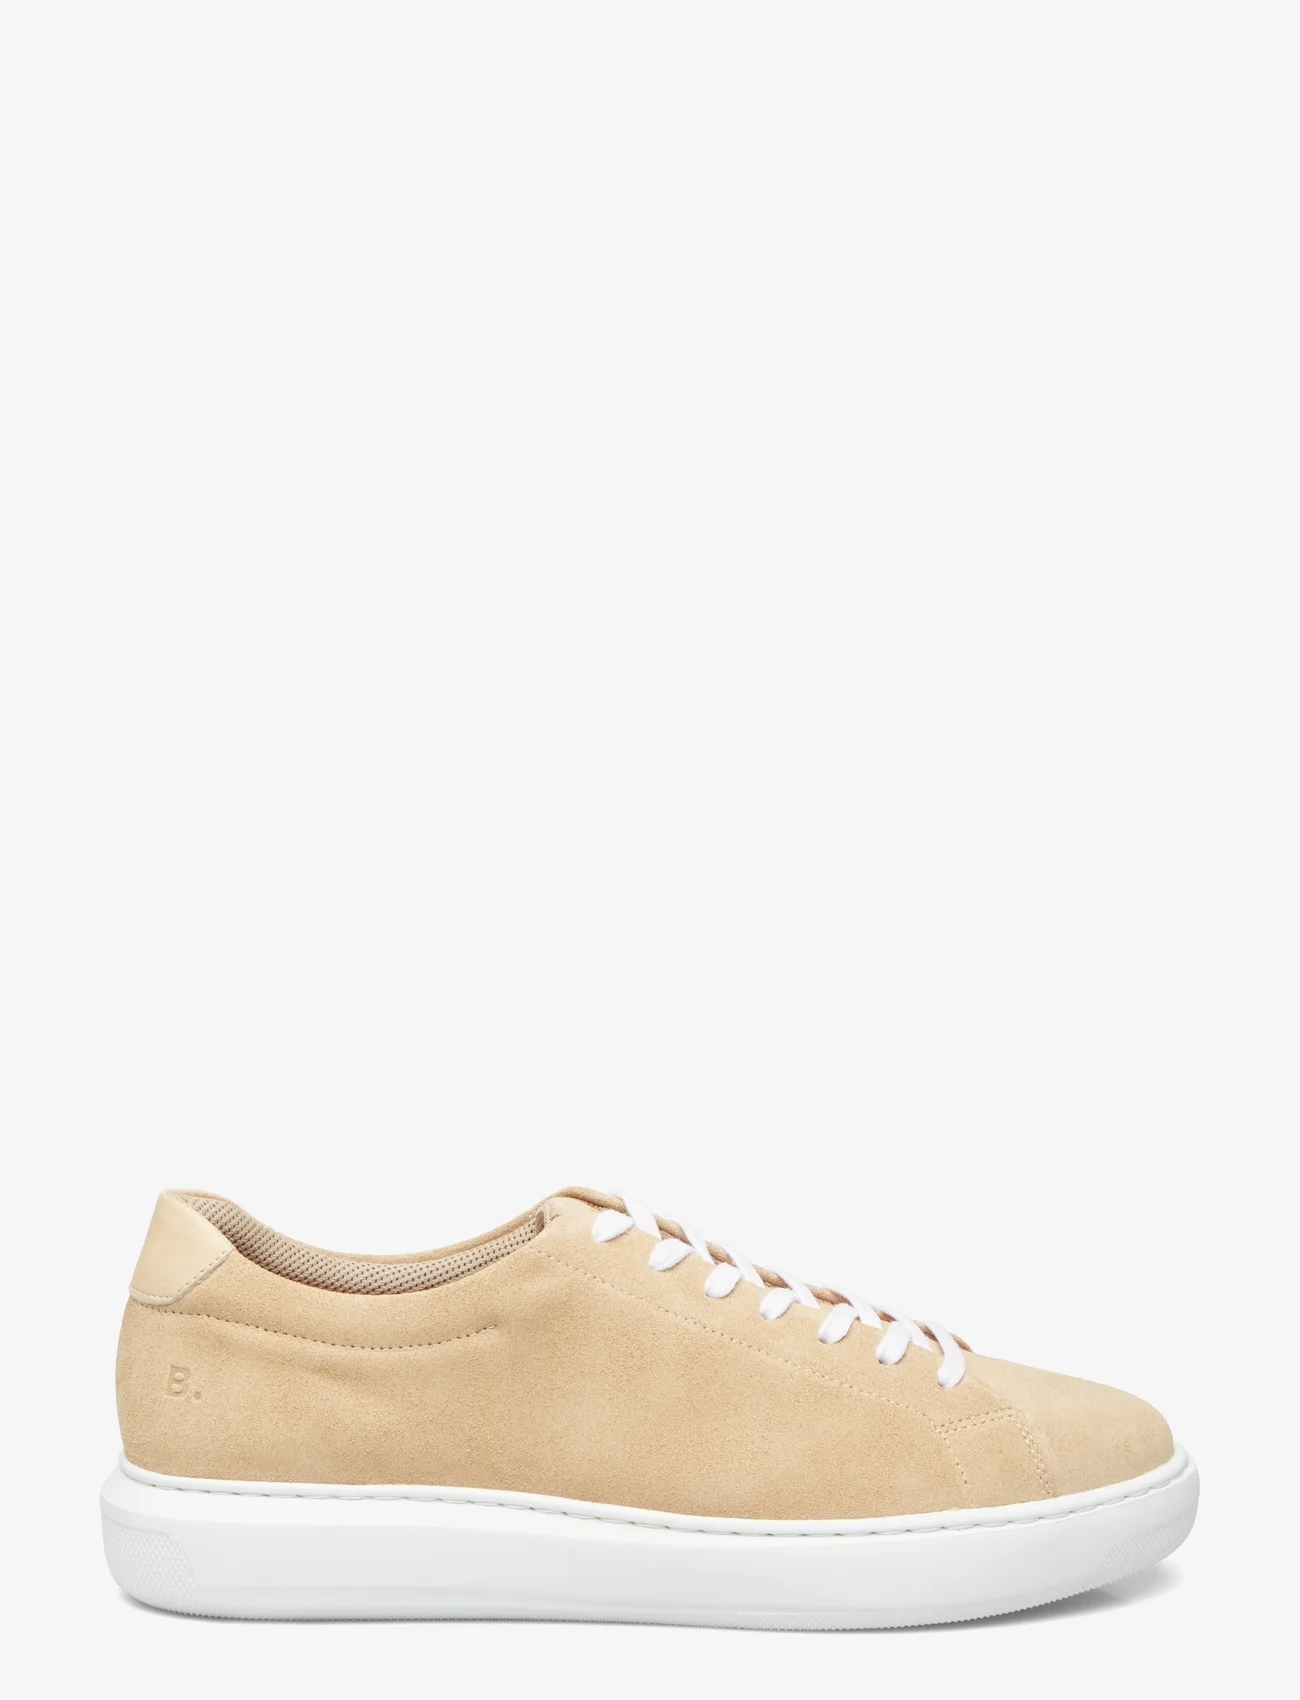 Bianco - BIAGARY Sneaker Suede - low tops - sand - 1